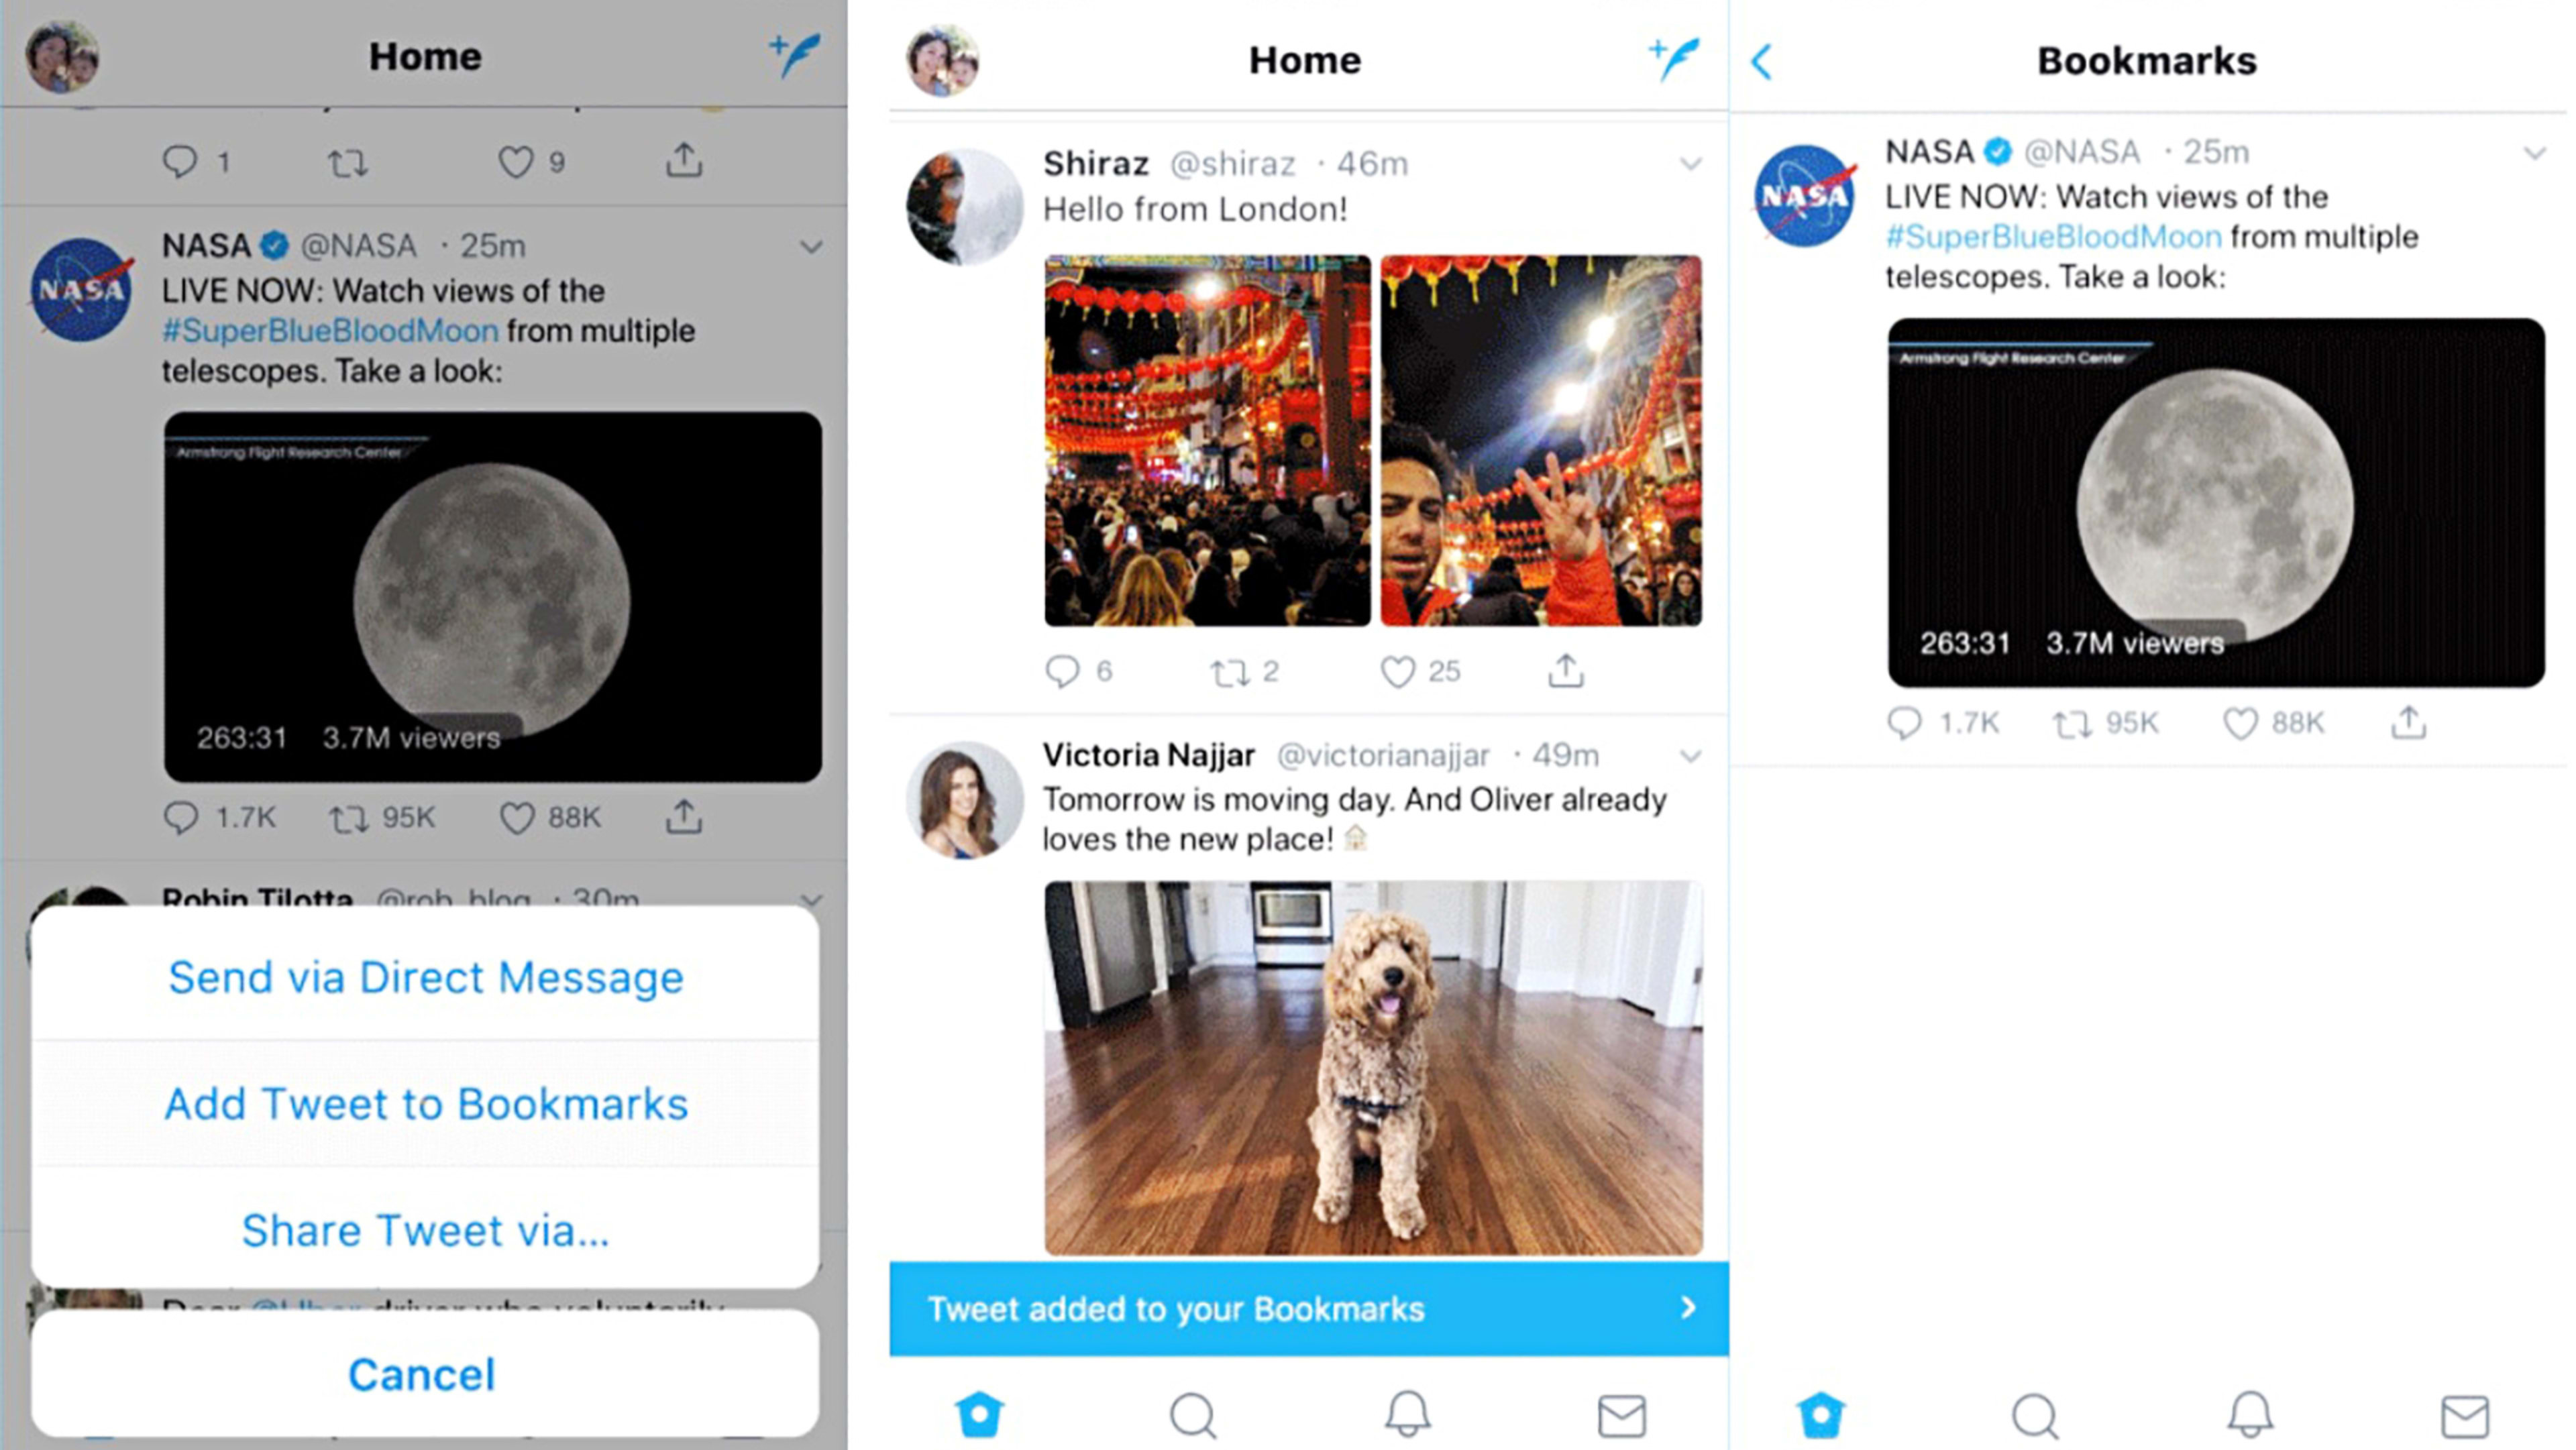 Twitter finally gives us an official way to bookmark tweets